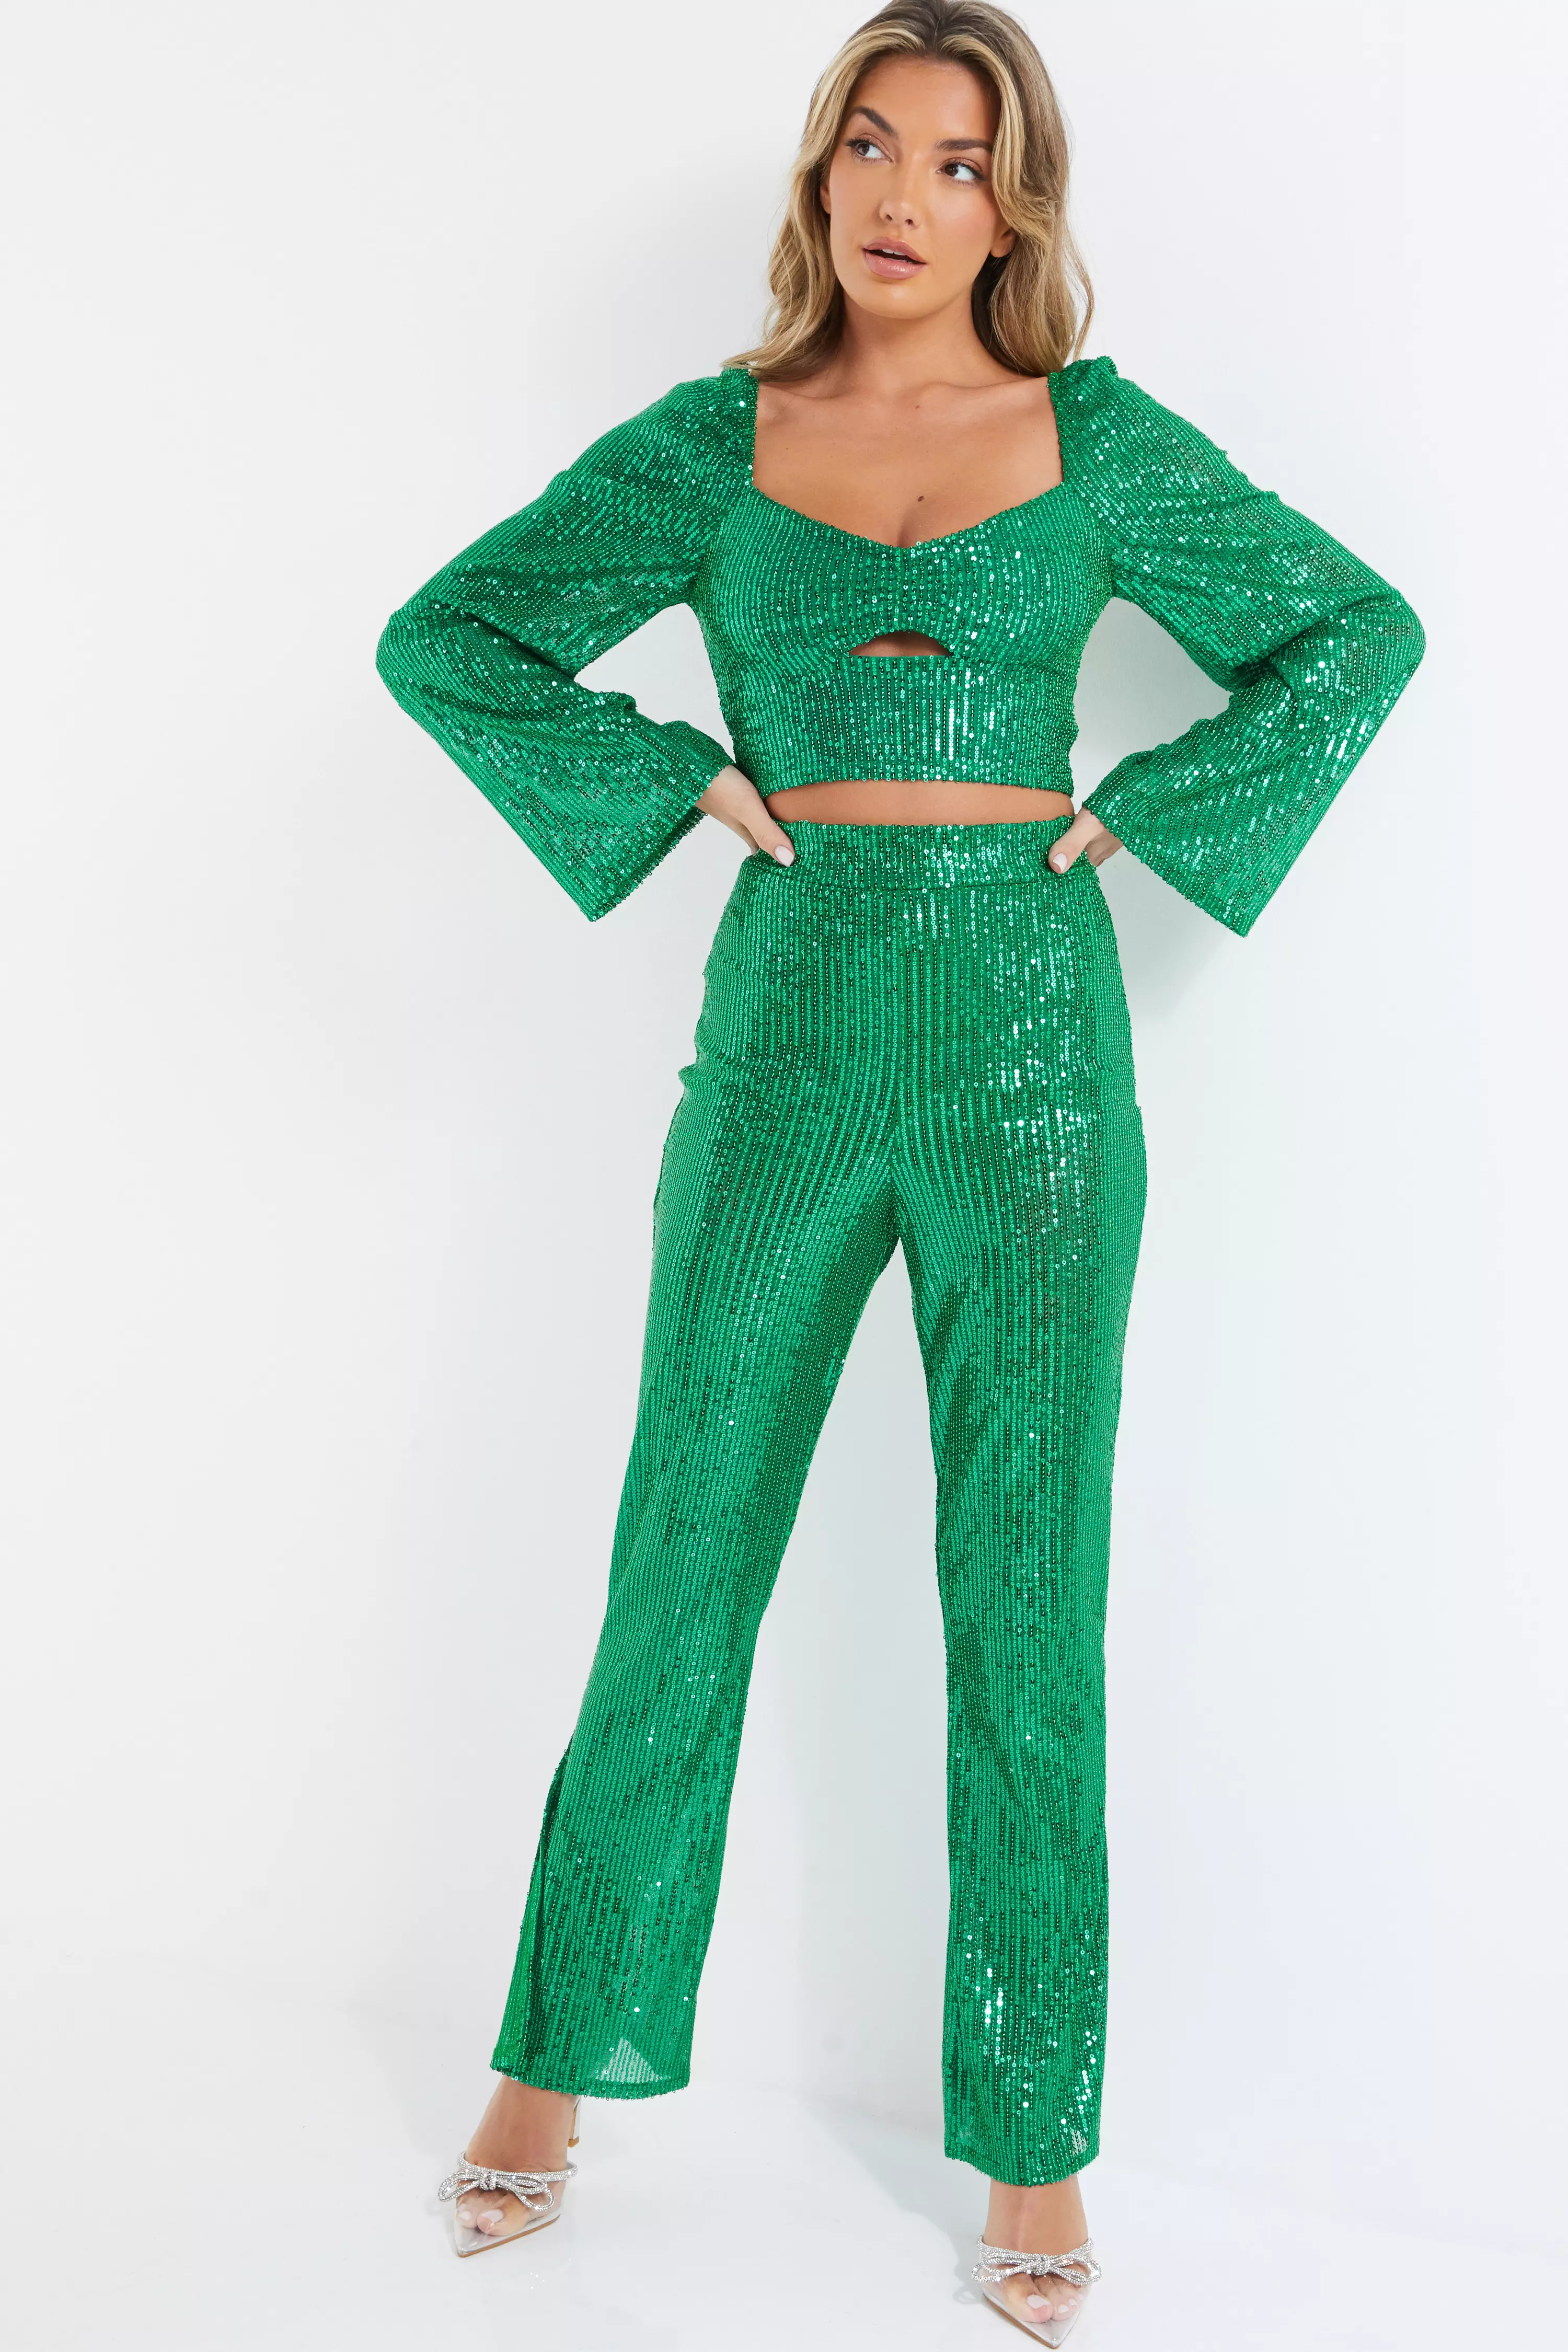 Green Sequin Palazzo Trousers